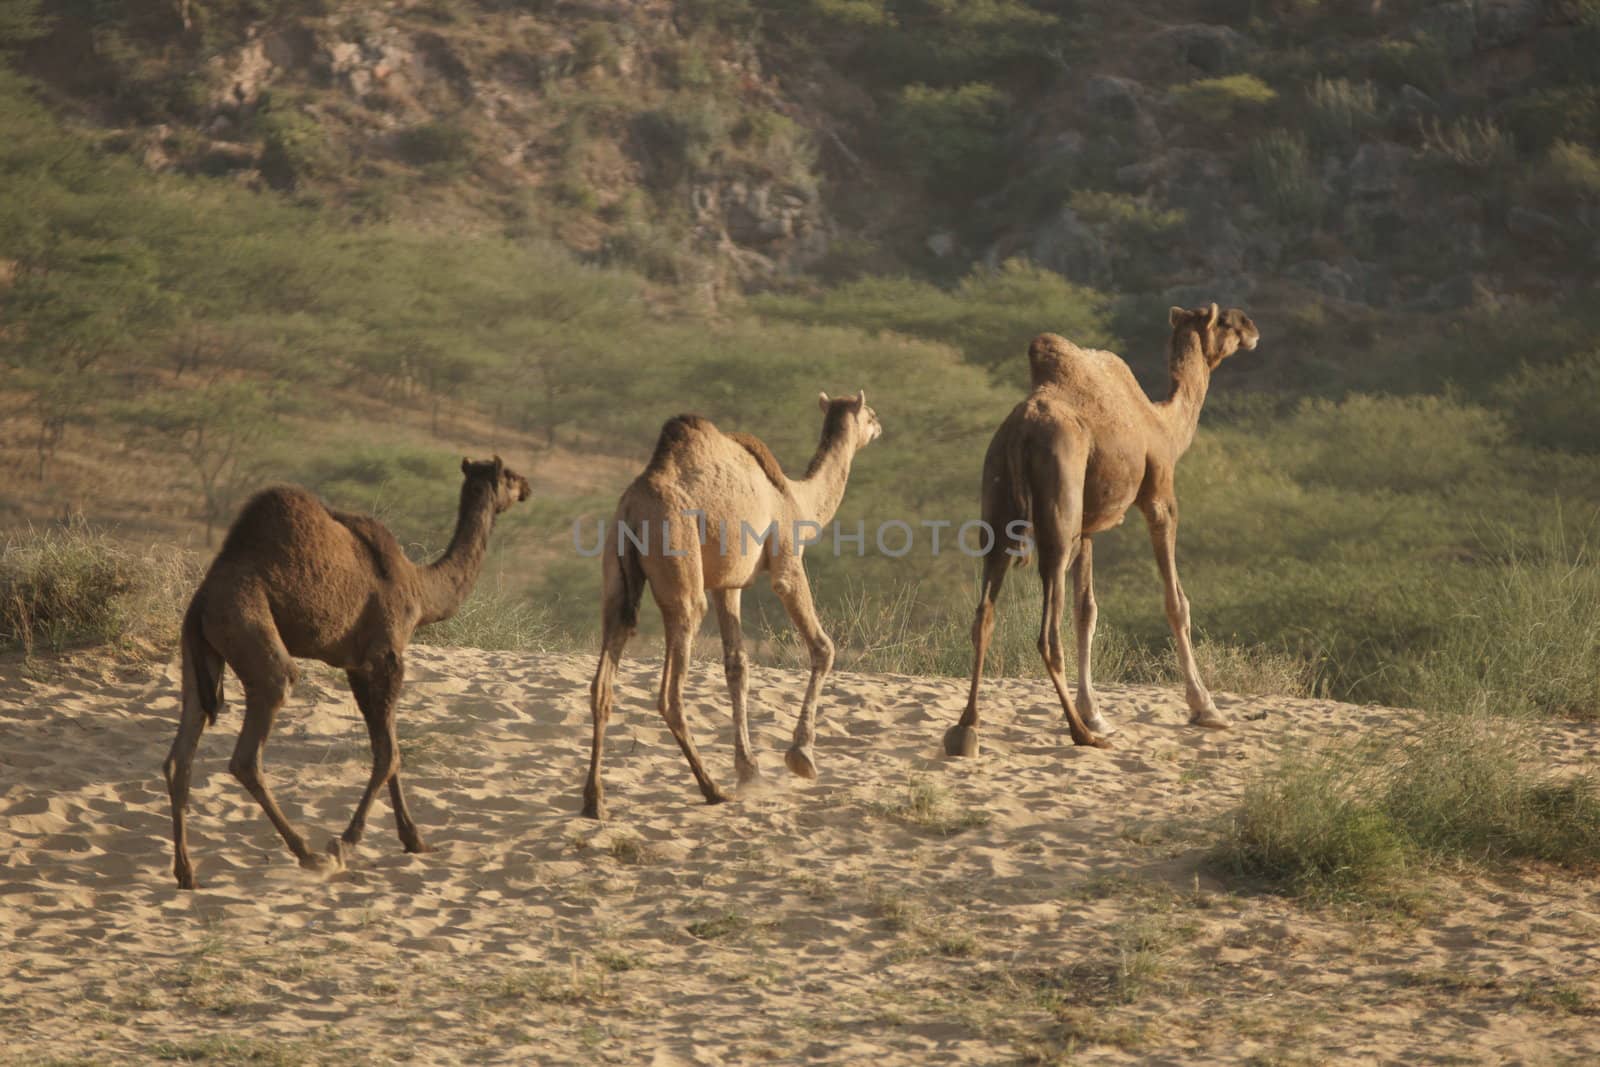 Camels Head Home From The Pushkar Fair by JeremyRichards